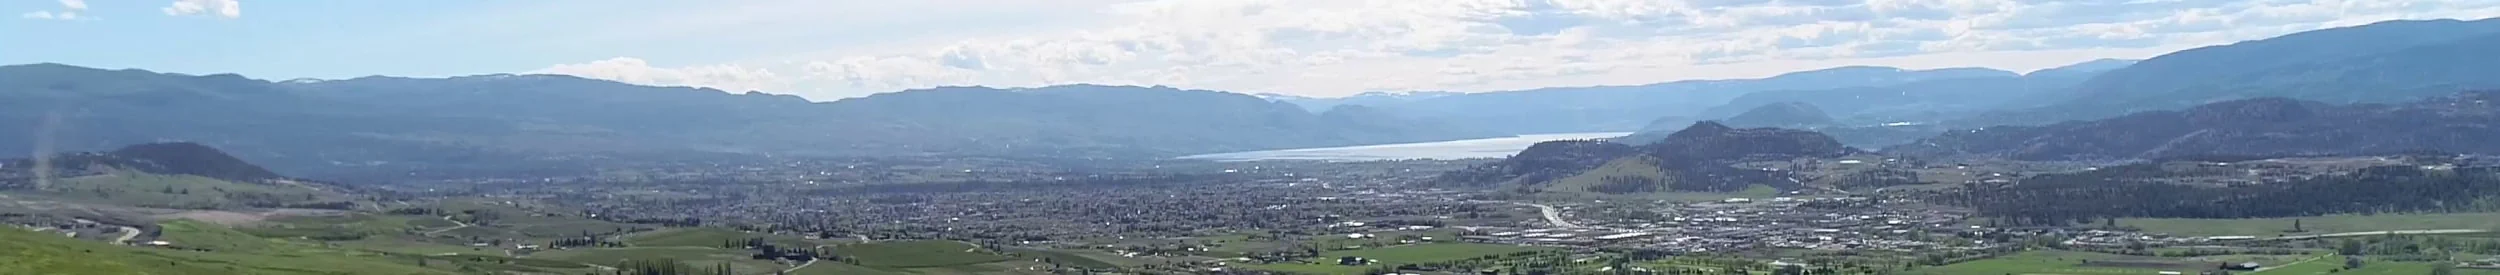 A panoramic view of the Okanagan Valley with West Kelowna in the foreground and mountains in the background